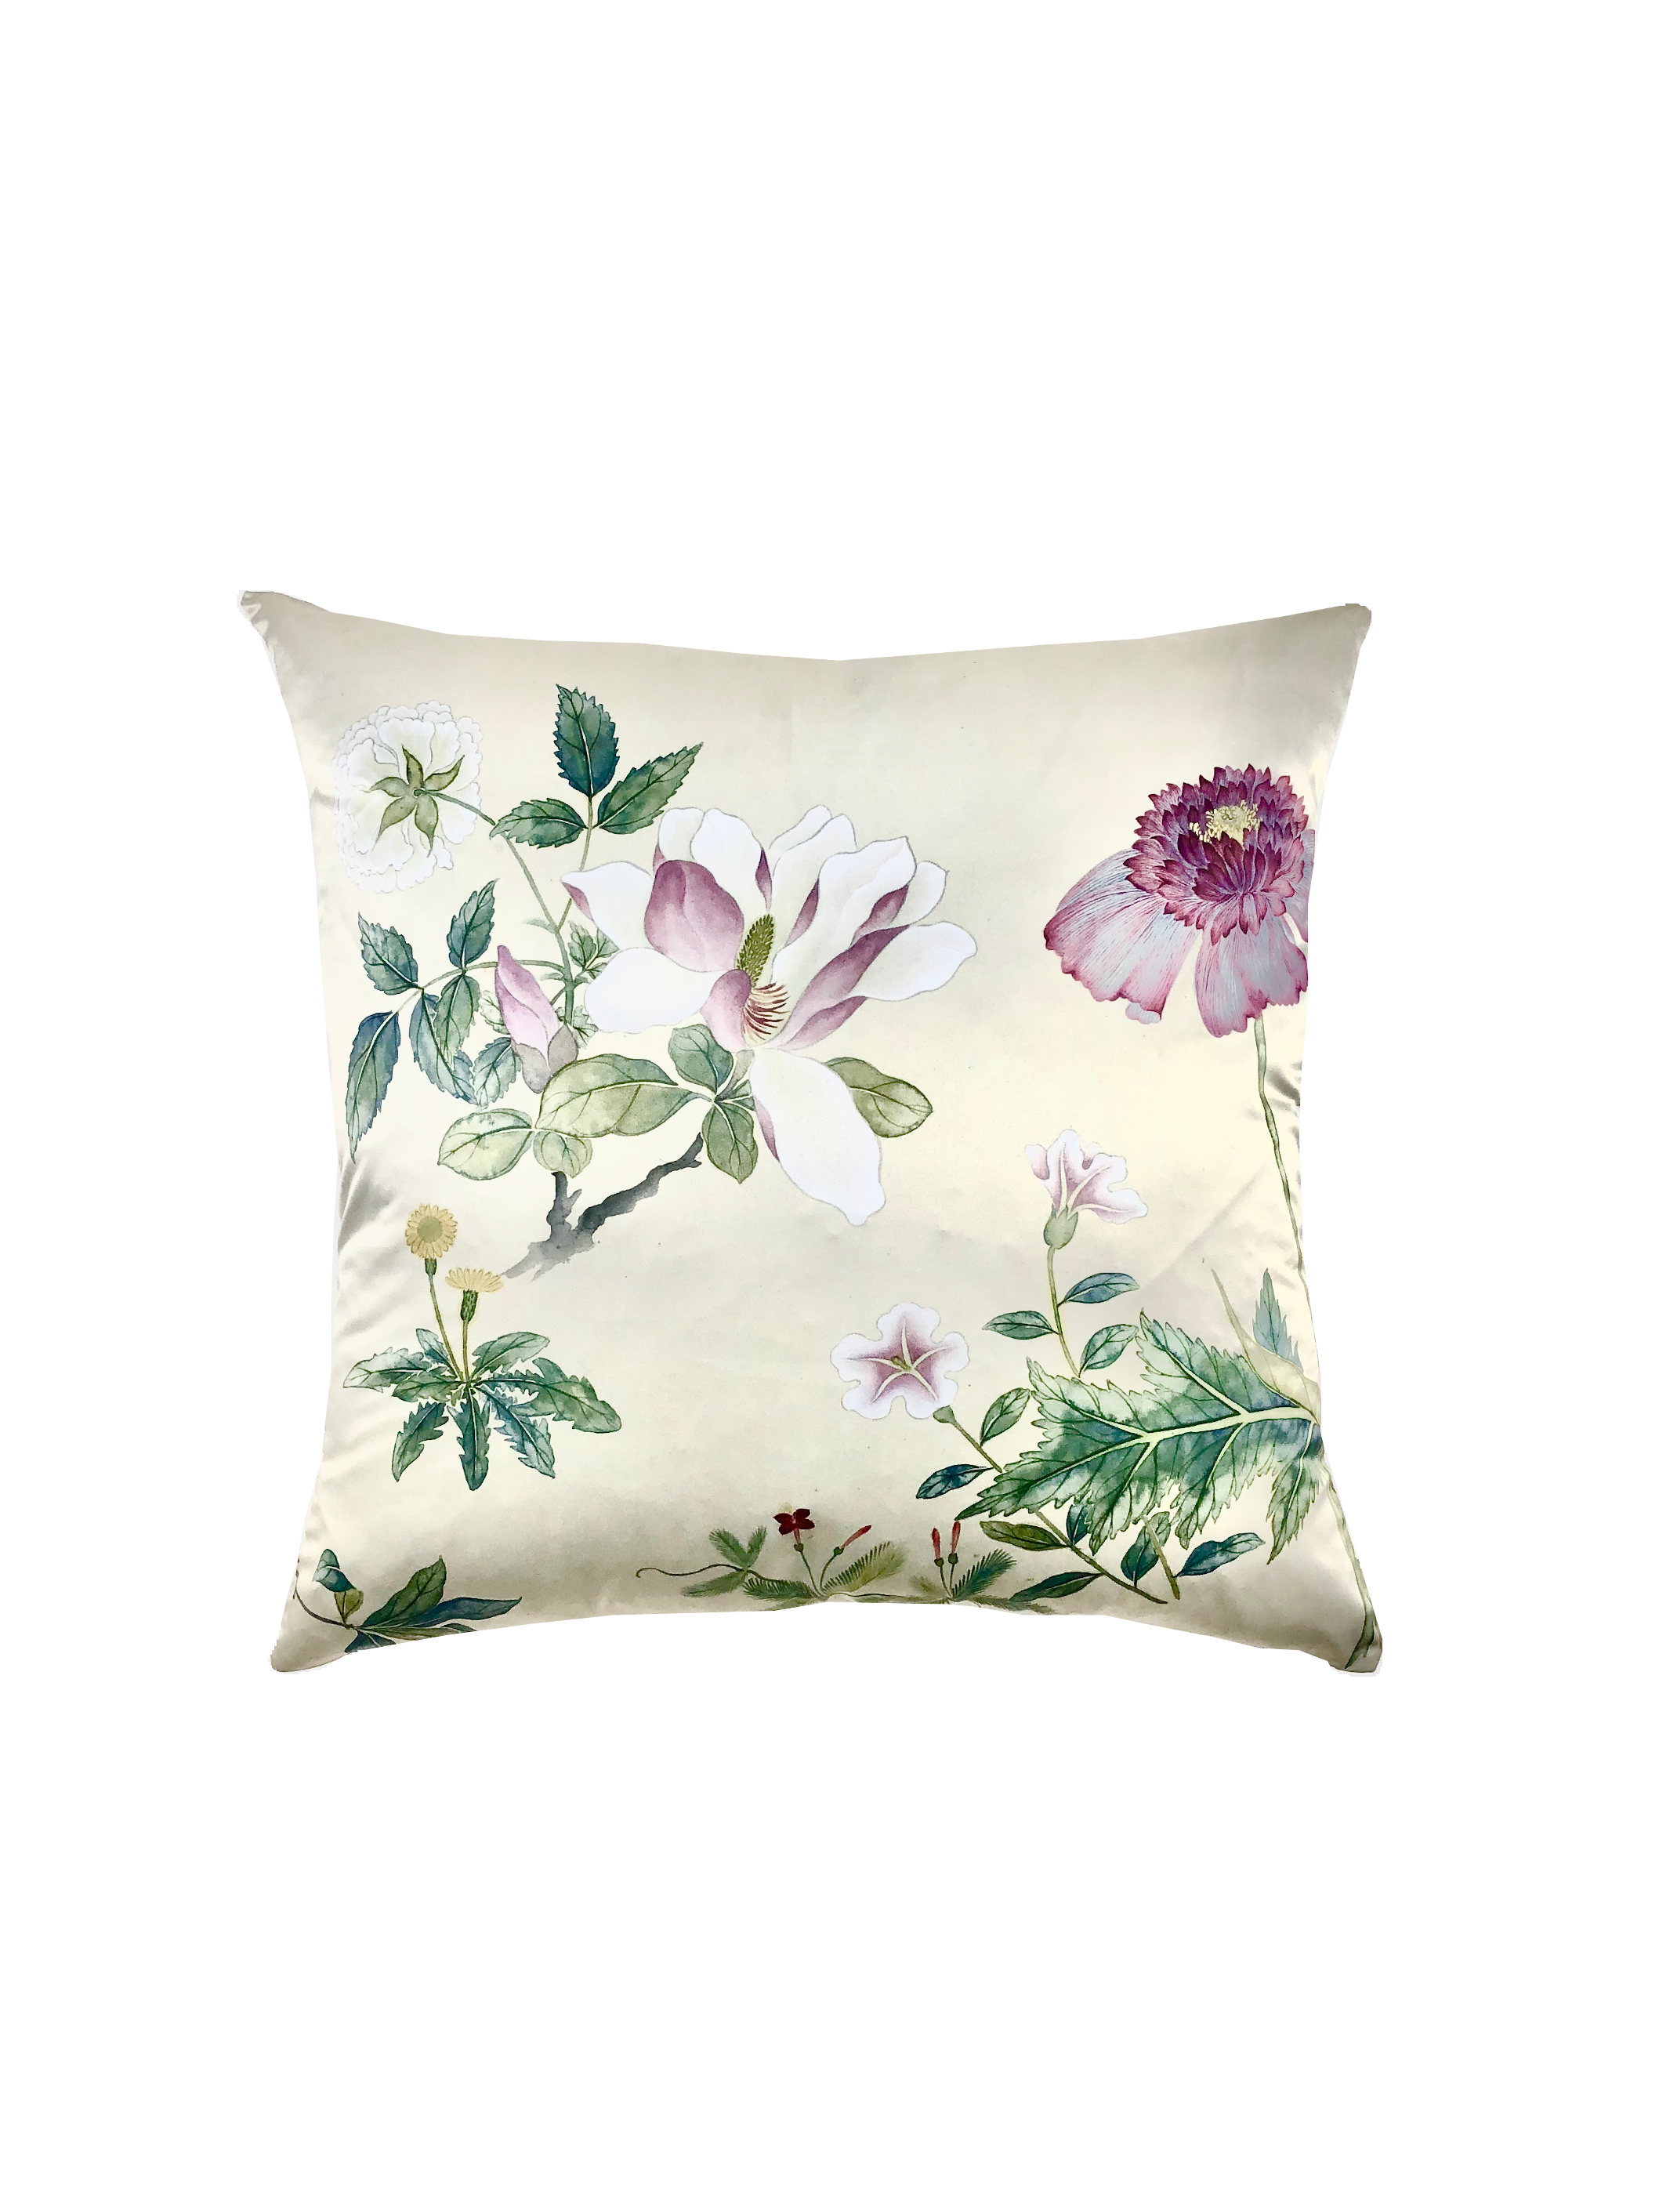 magnolia pillow covers